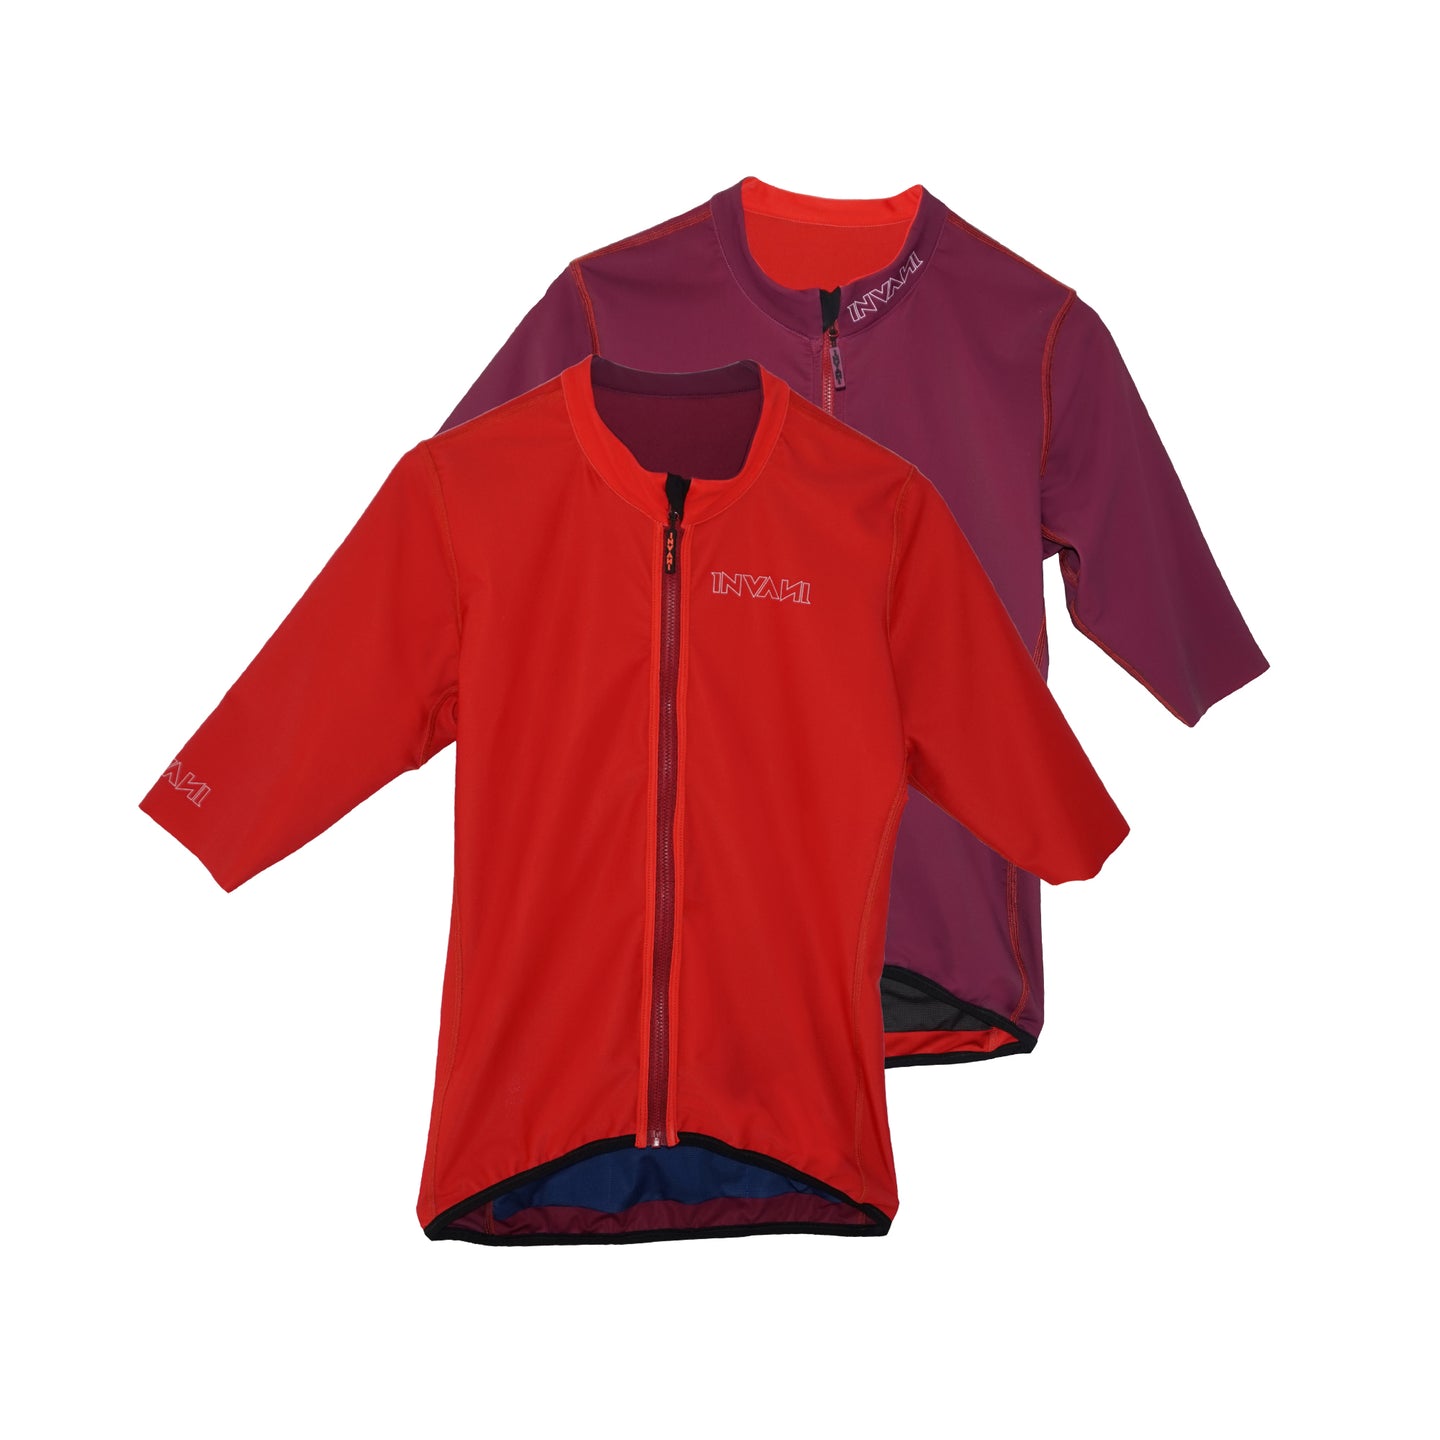 Cool Weather Reversible Jersey: Red / Burgundy (Men's)